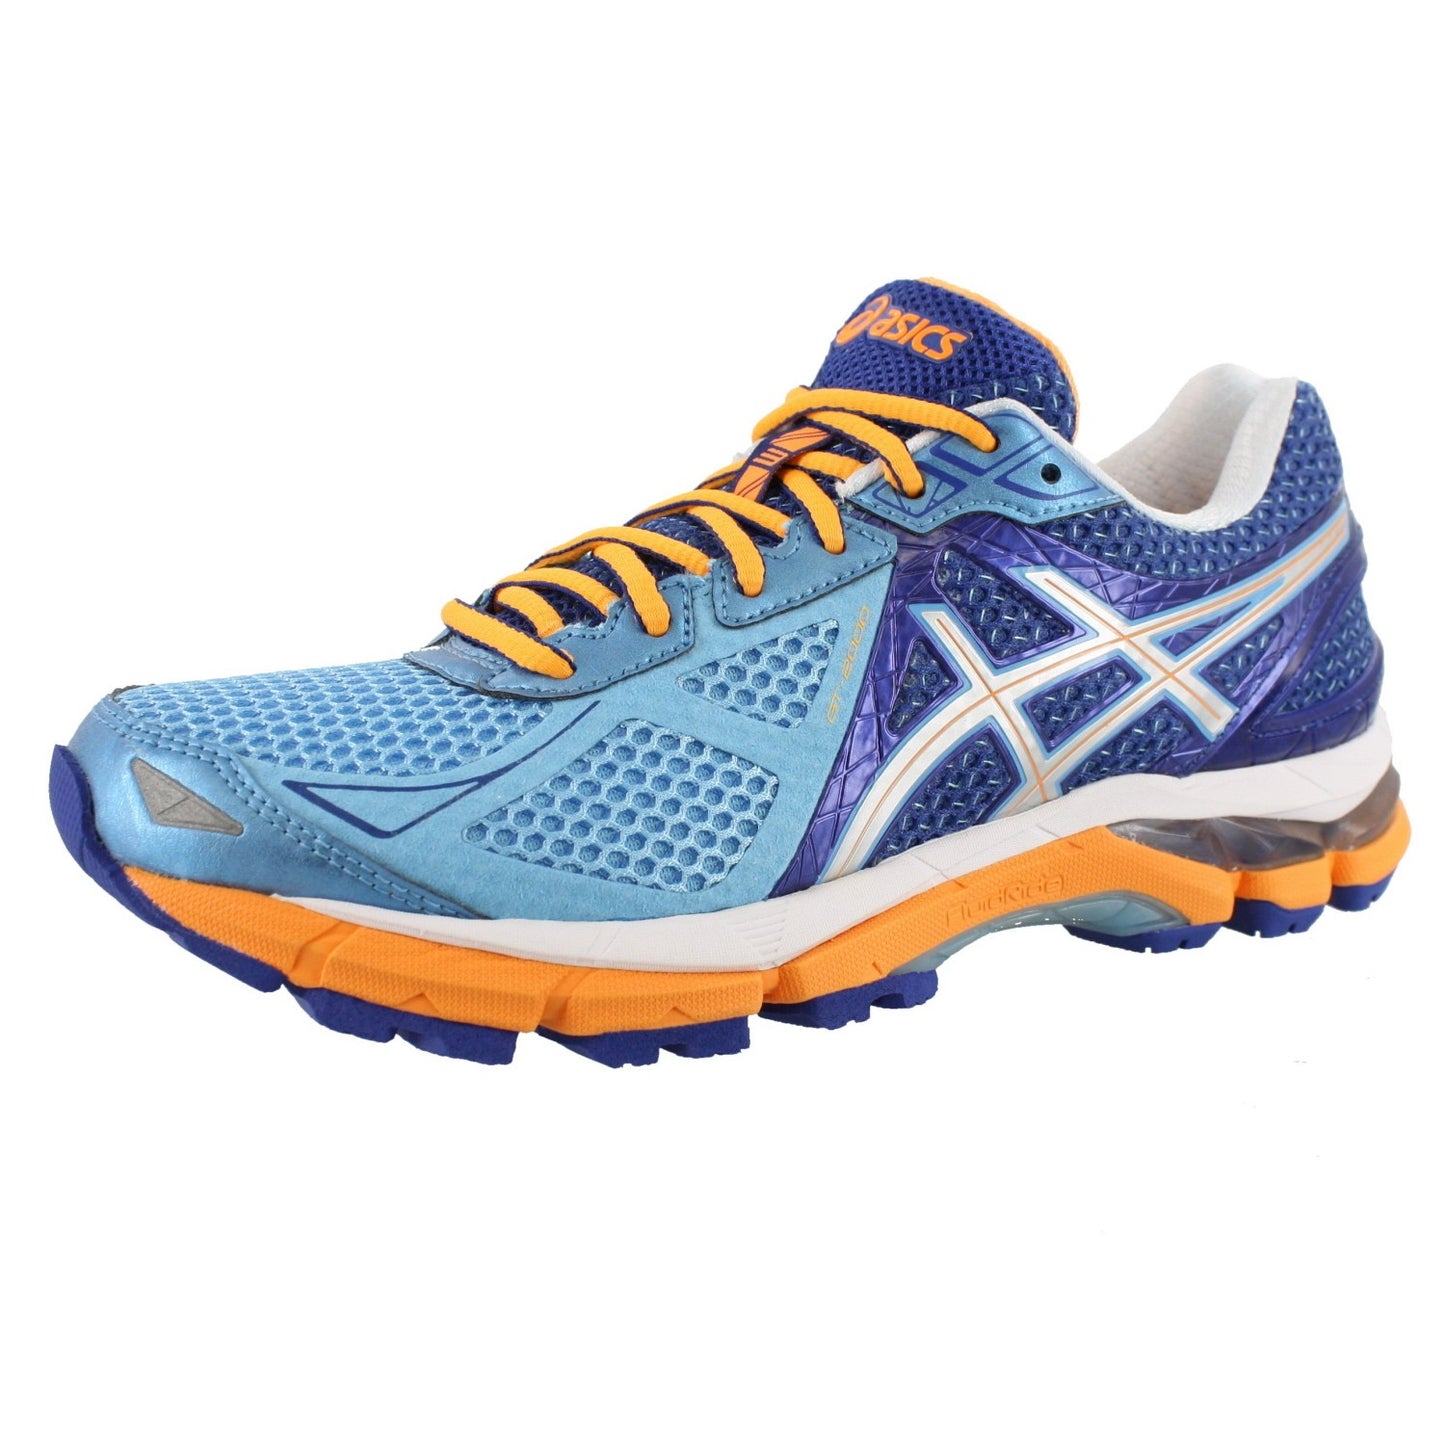 Lateral of Soft Blue/Silver/Deep Blue ASICS Women Walking Trail Cushioned Running Sneakers